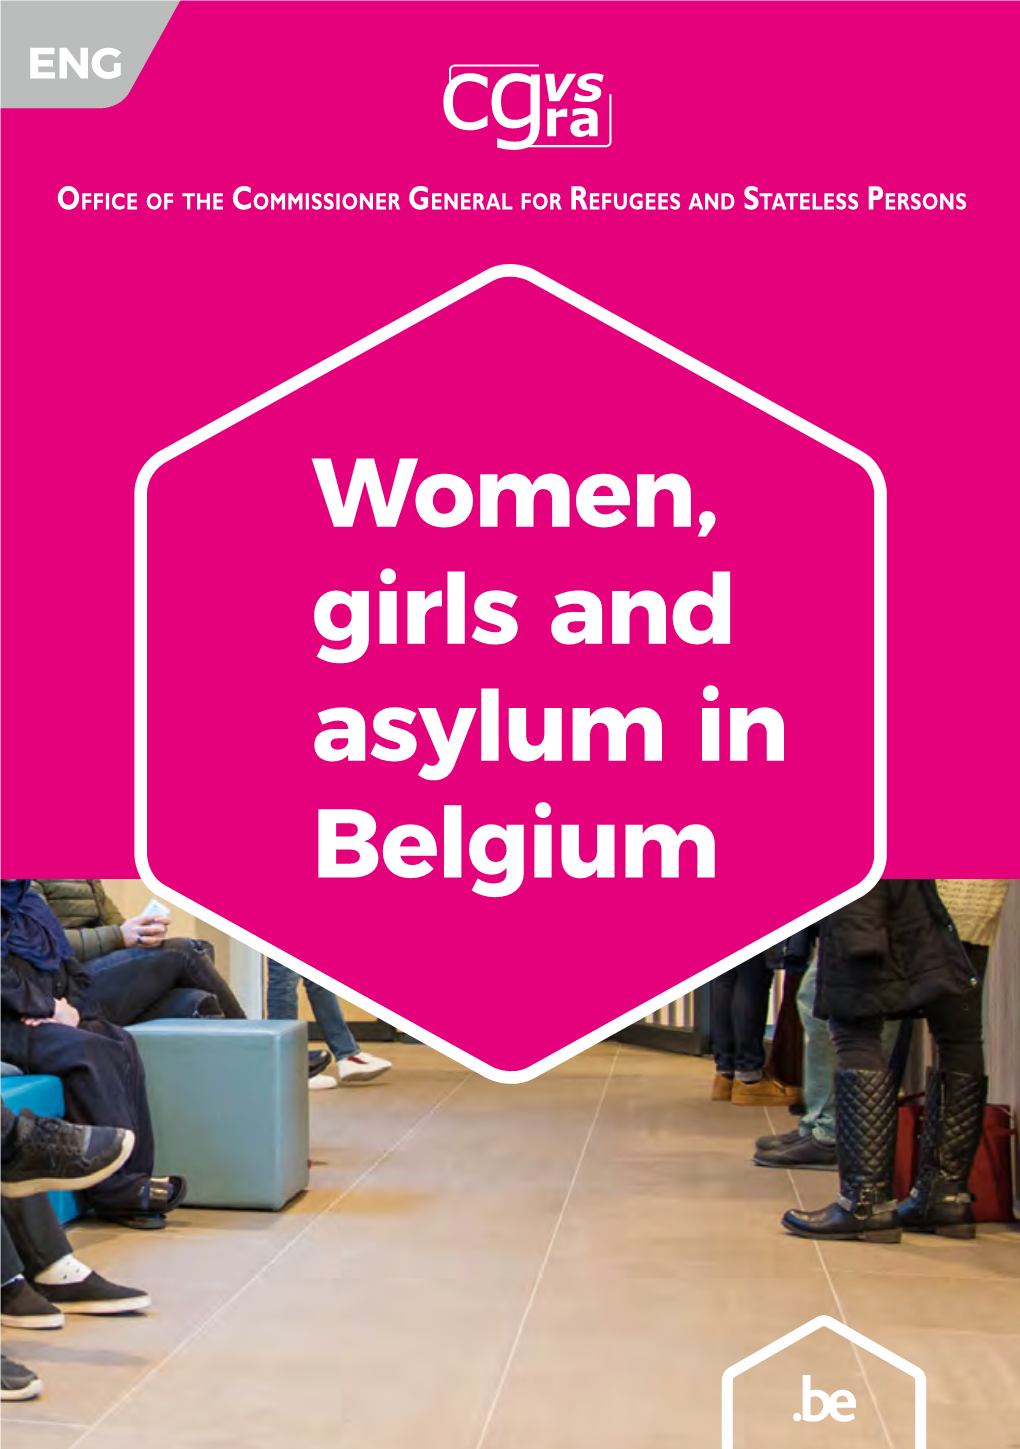 Women, Girls and Asylum in Belgium This Brochure Is Published by the Office of the Commissioner General for Refugees and Stateless Persons (CGRS)